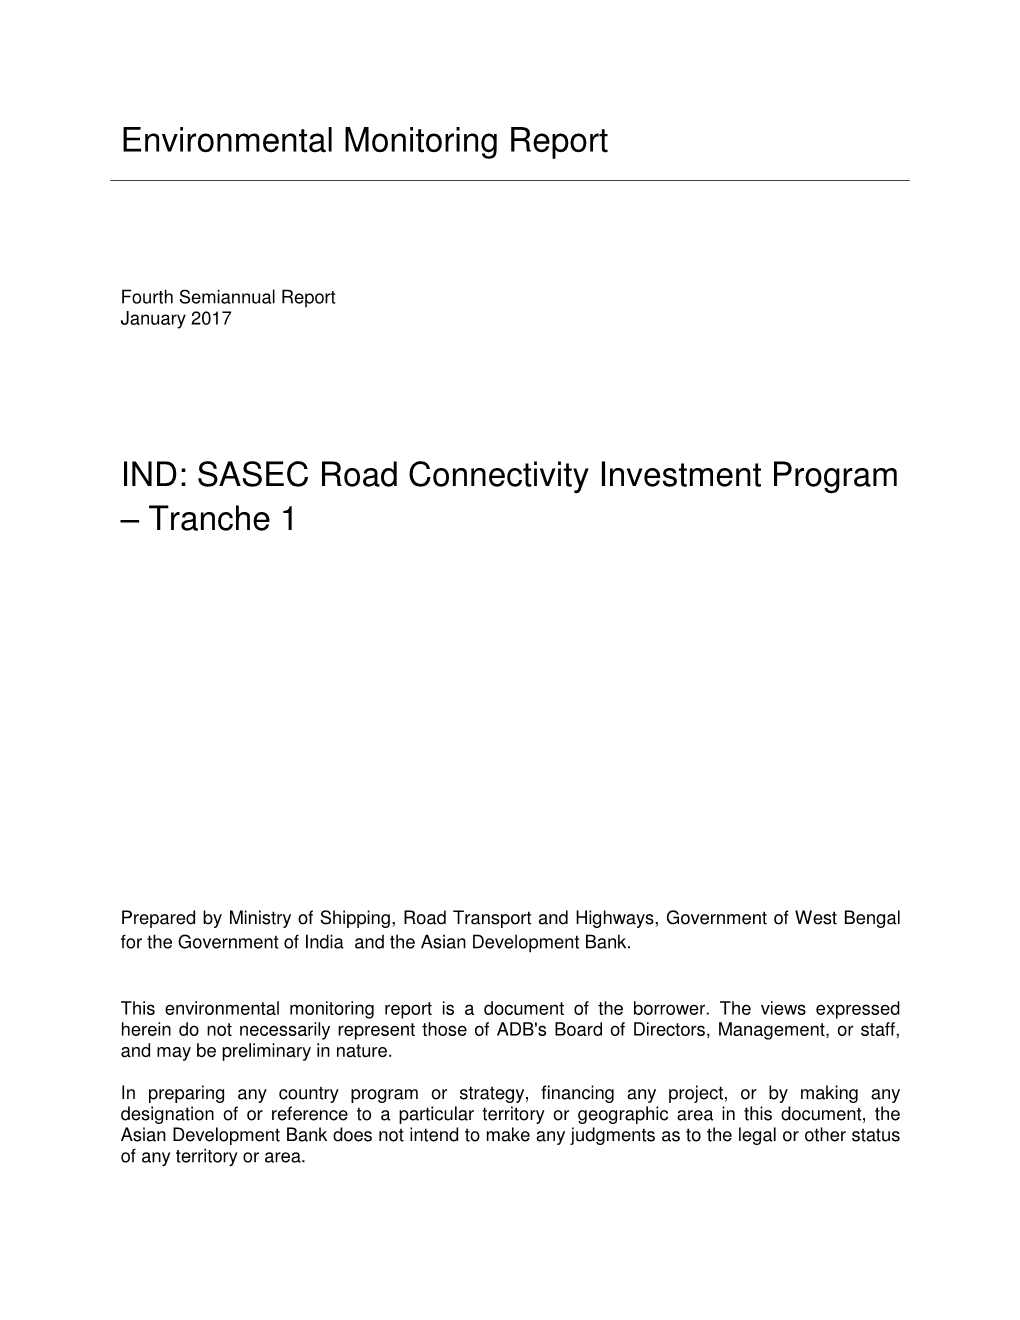 IND: SASEC Road Connectivity Investment Program – Tranche 1